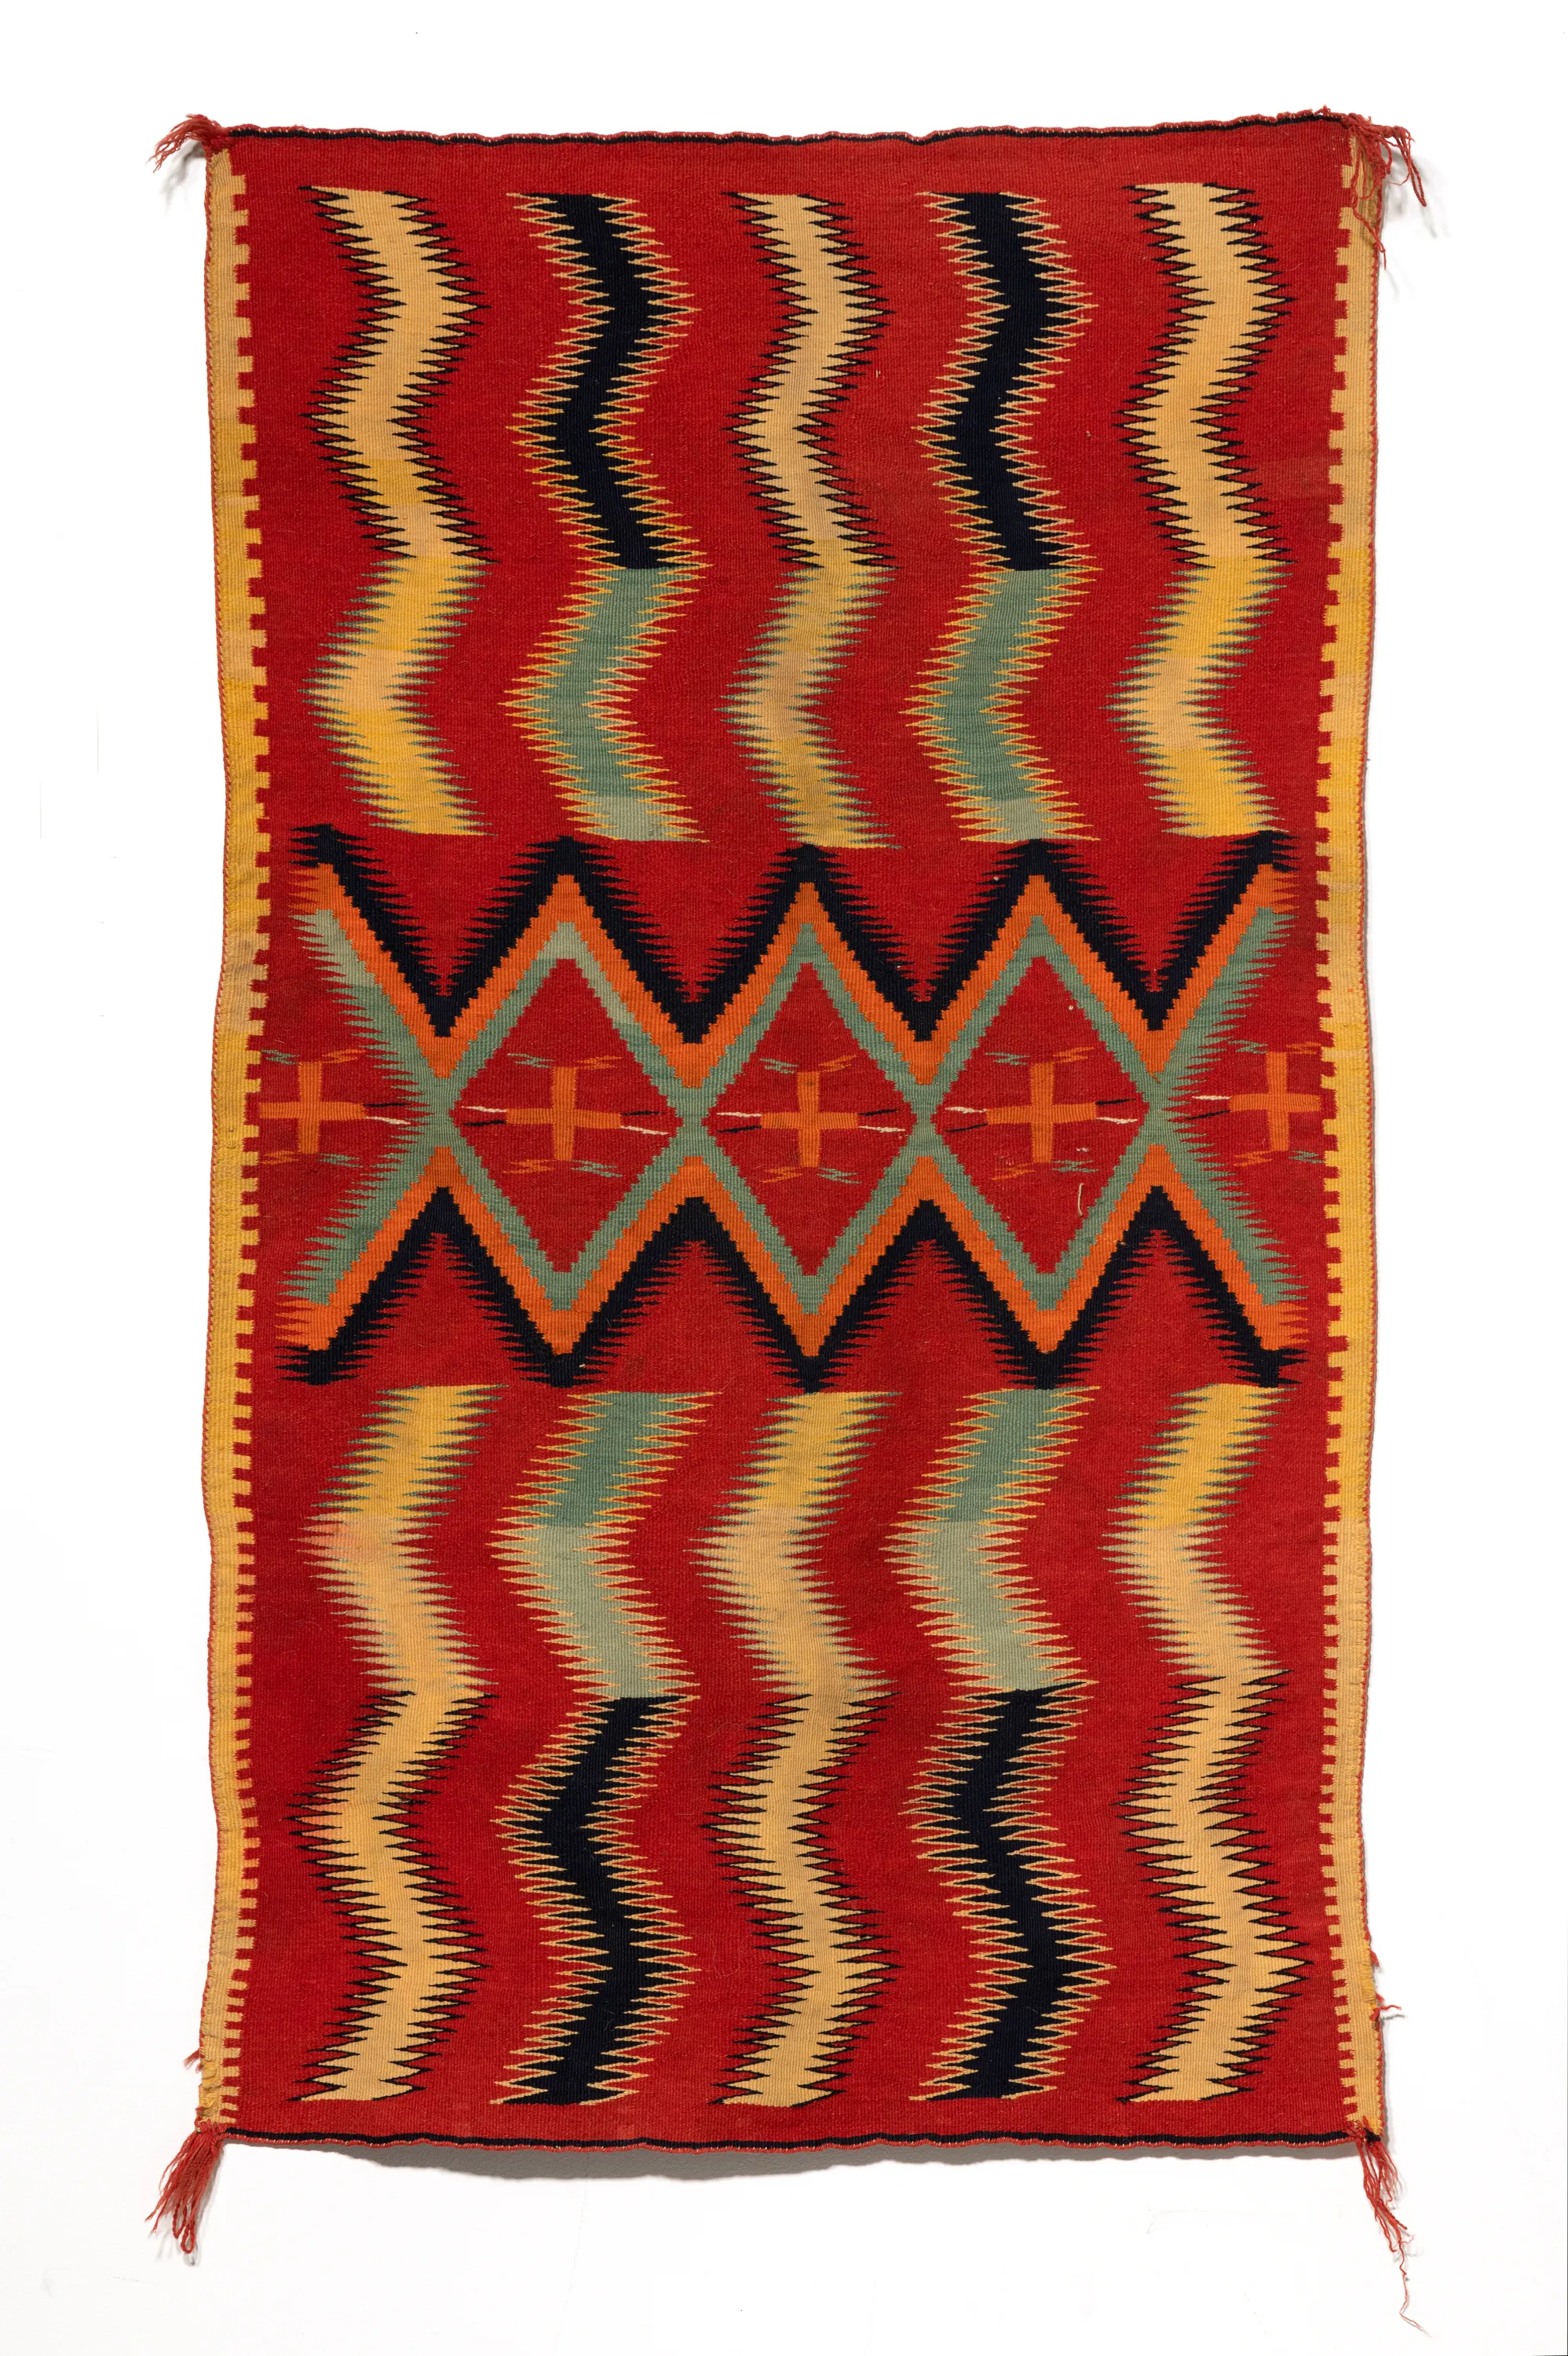 Artist unknown, this Navajo rug from the1890s contains bright reds, yellows, and oranges in geometric vertical patterns.